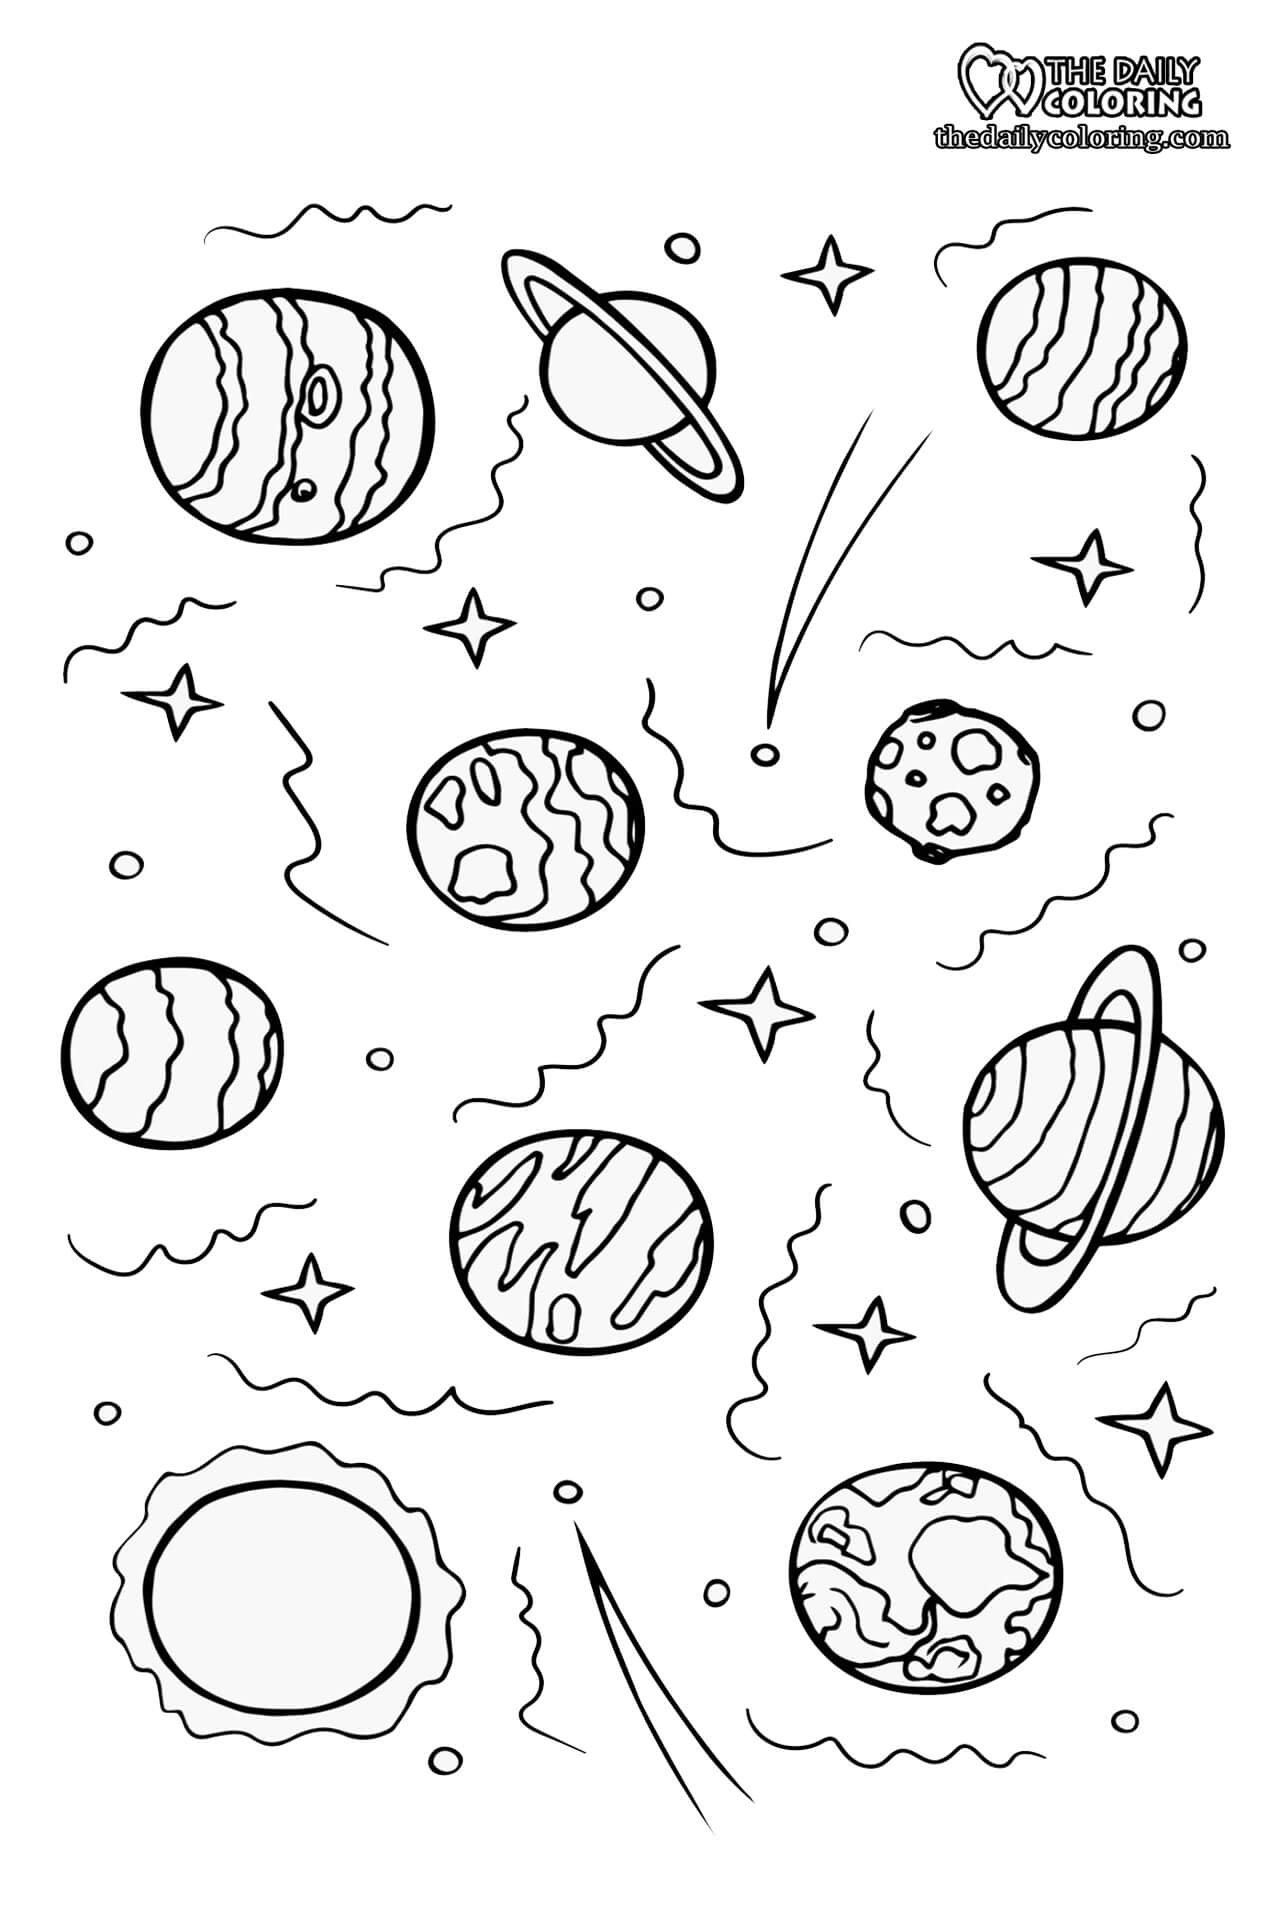 space-galaxy-coloring-page